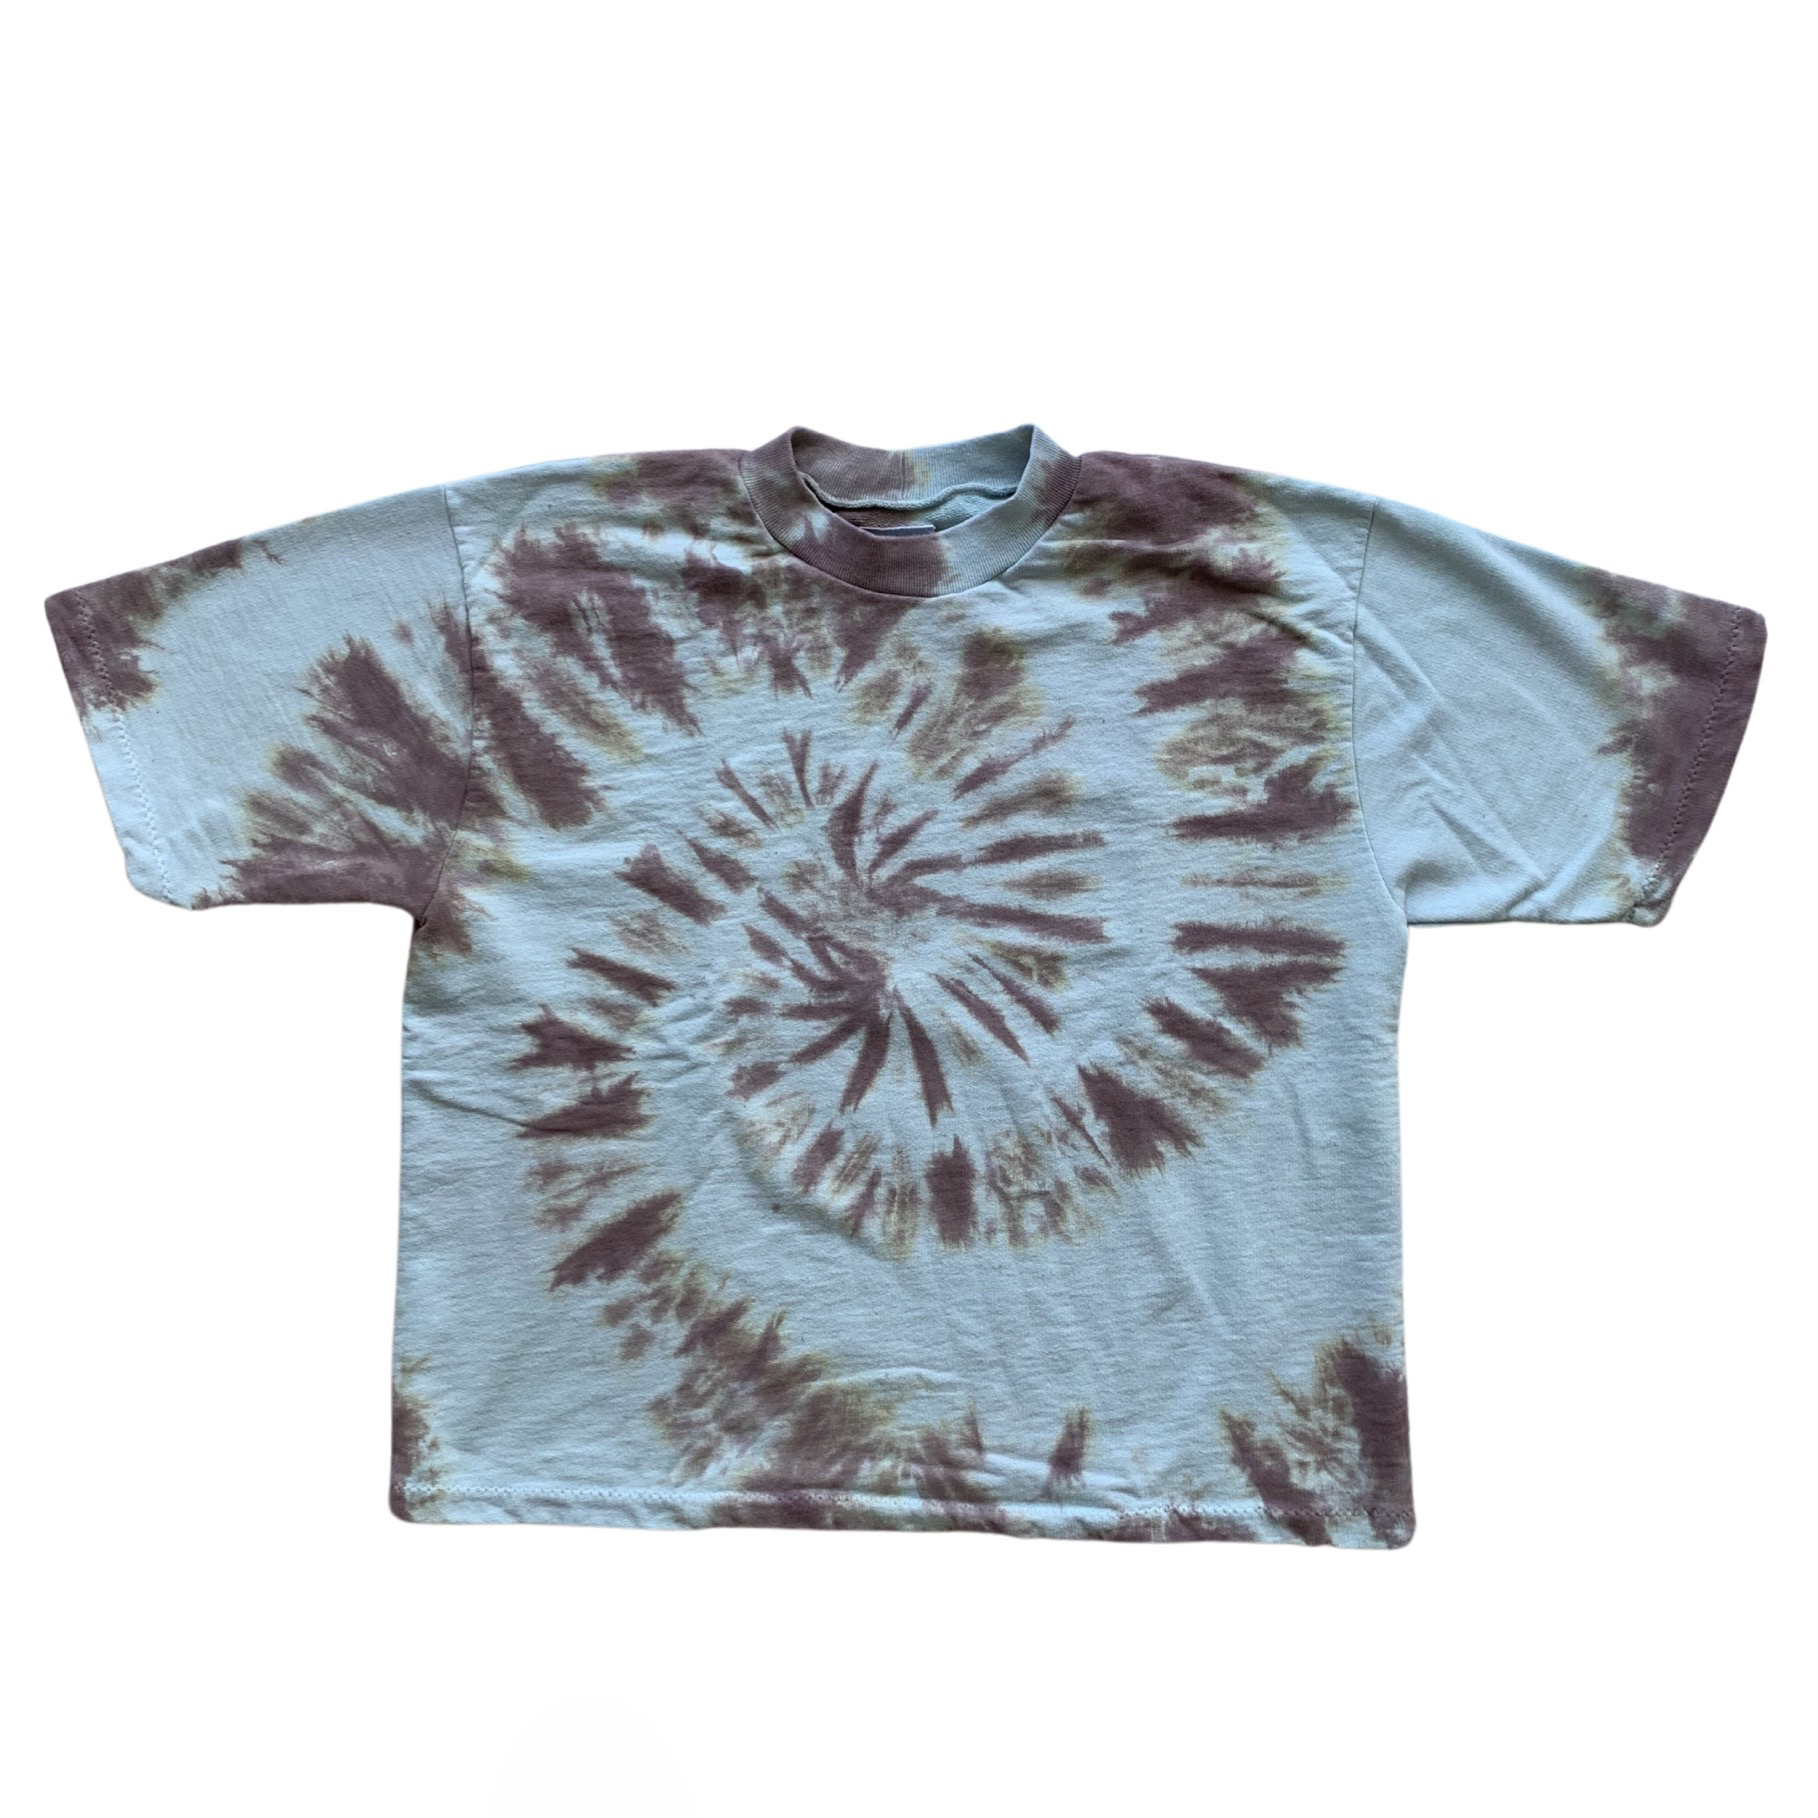 french terry heavy tee - organic usa cotton - tie dyed - M SHORT